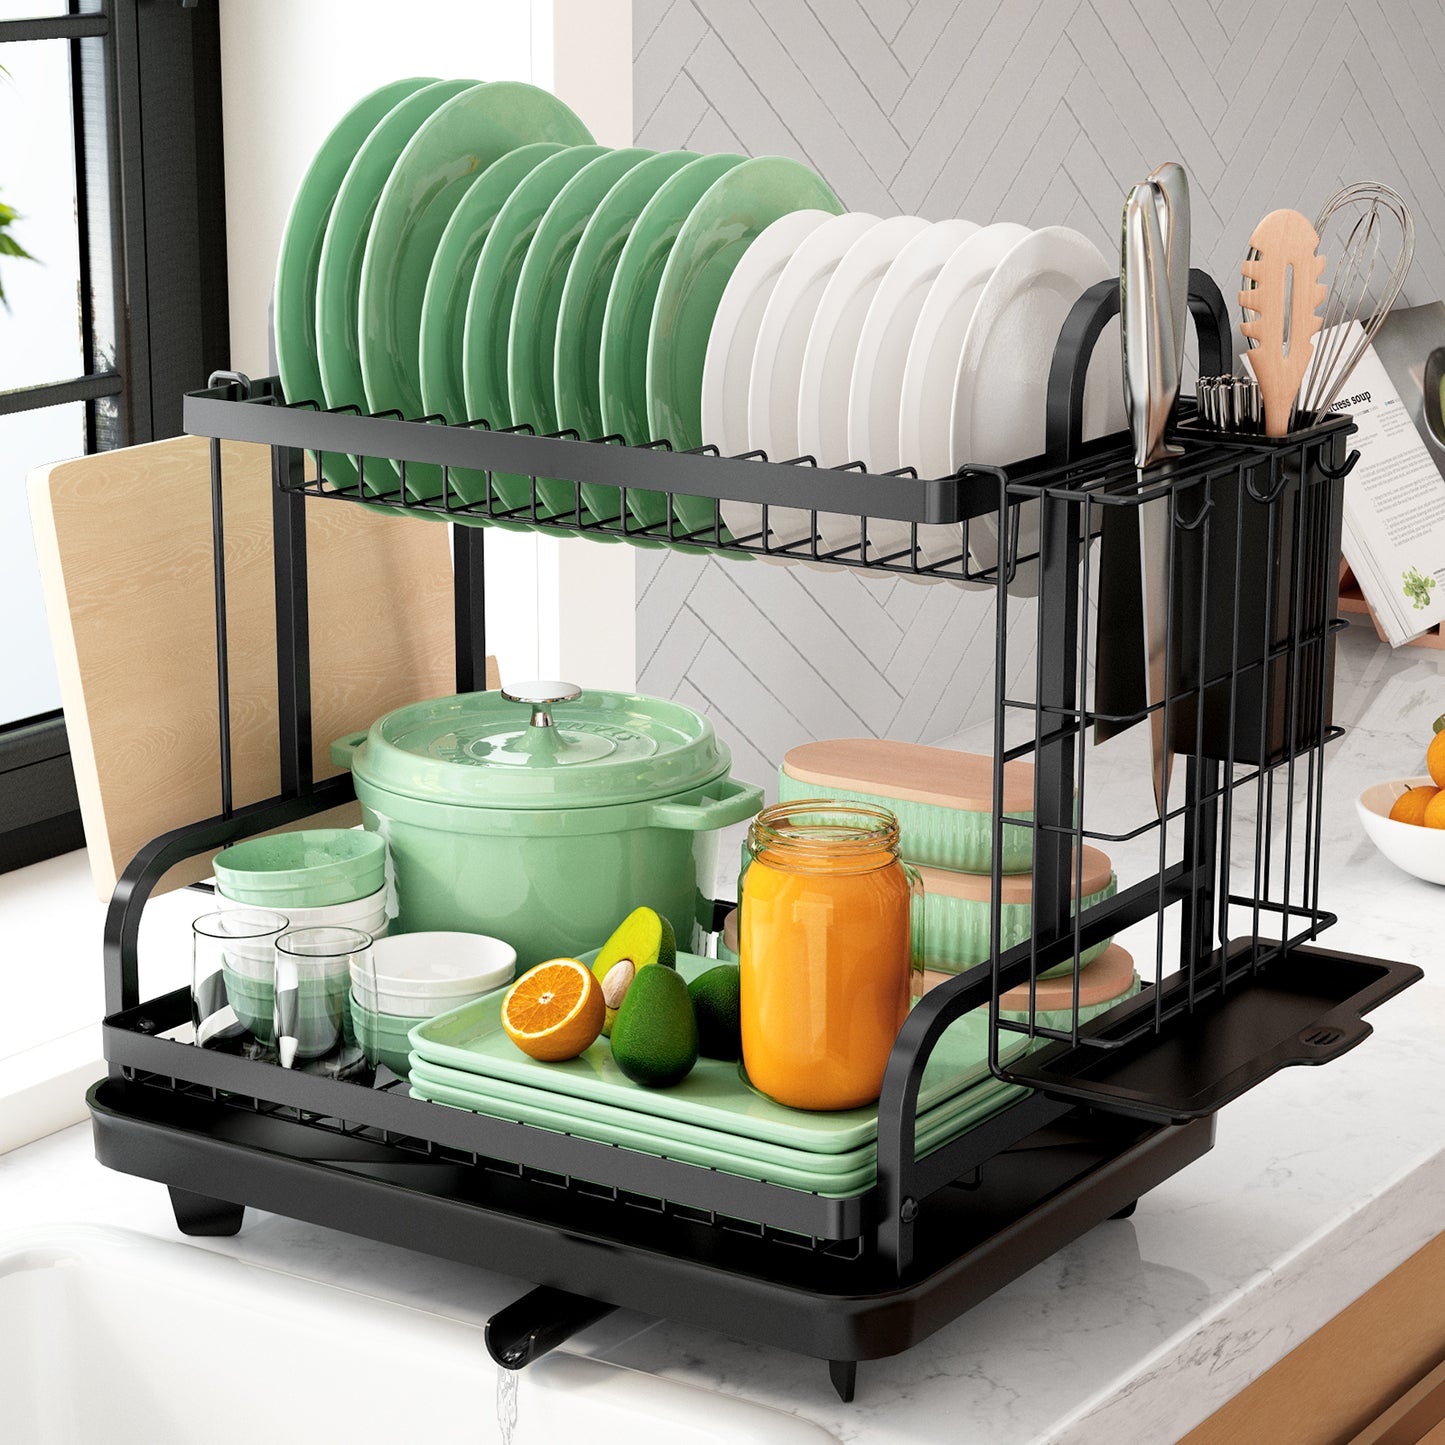 Kitsure Dish Drying Rack- Space-Saving Dish Rack, Dish Racks for Kitchen  Counter, Durable Stainless Steel Kitchen Drying Rack with a Cutlery Holder